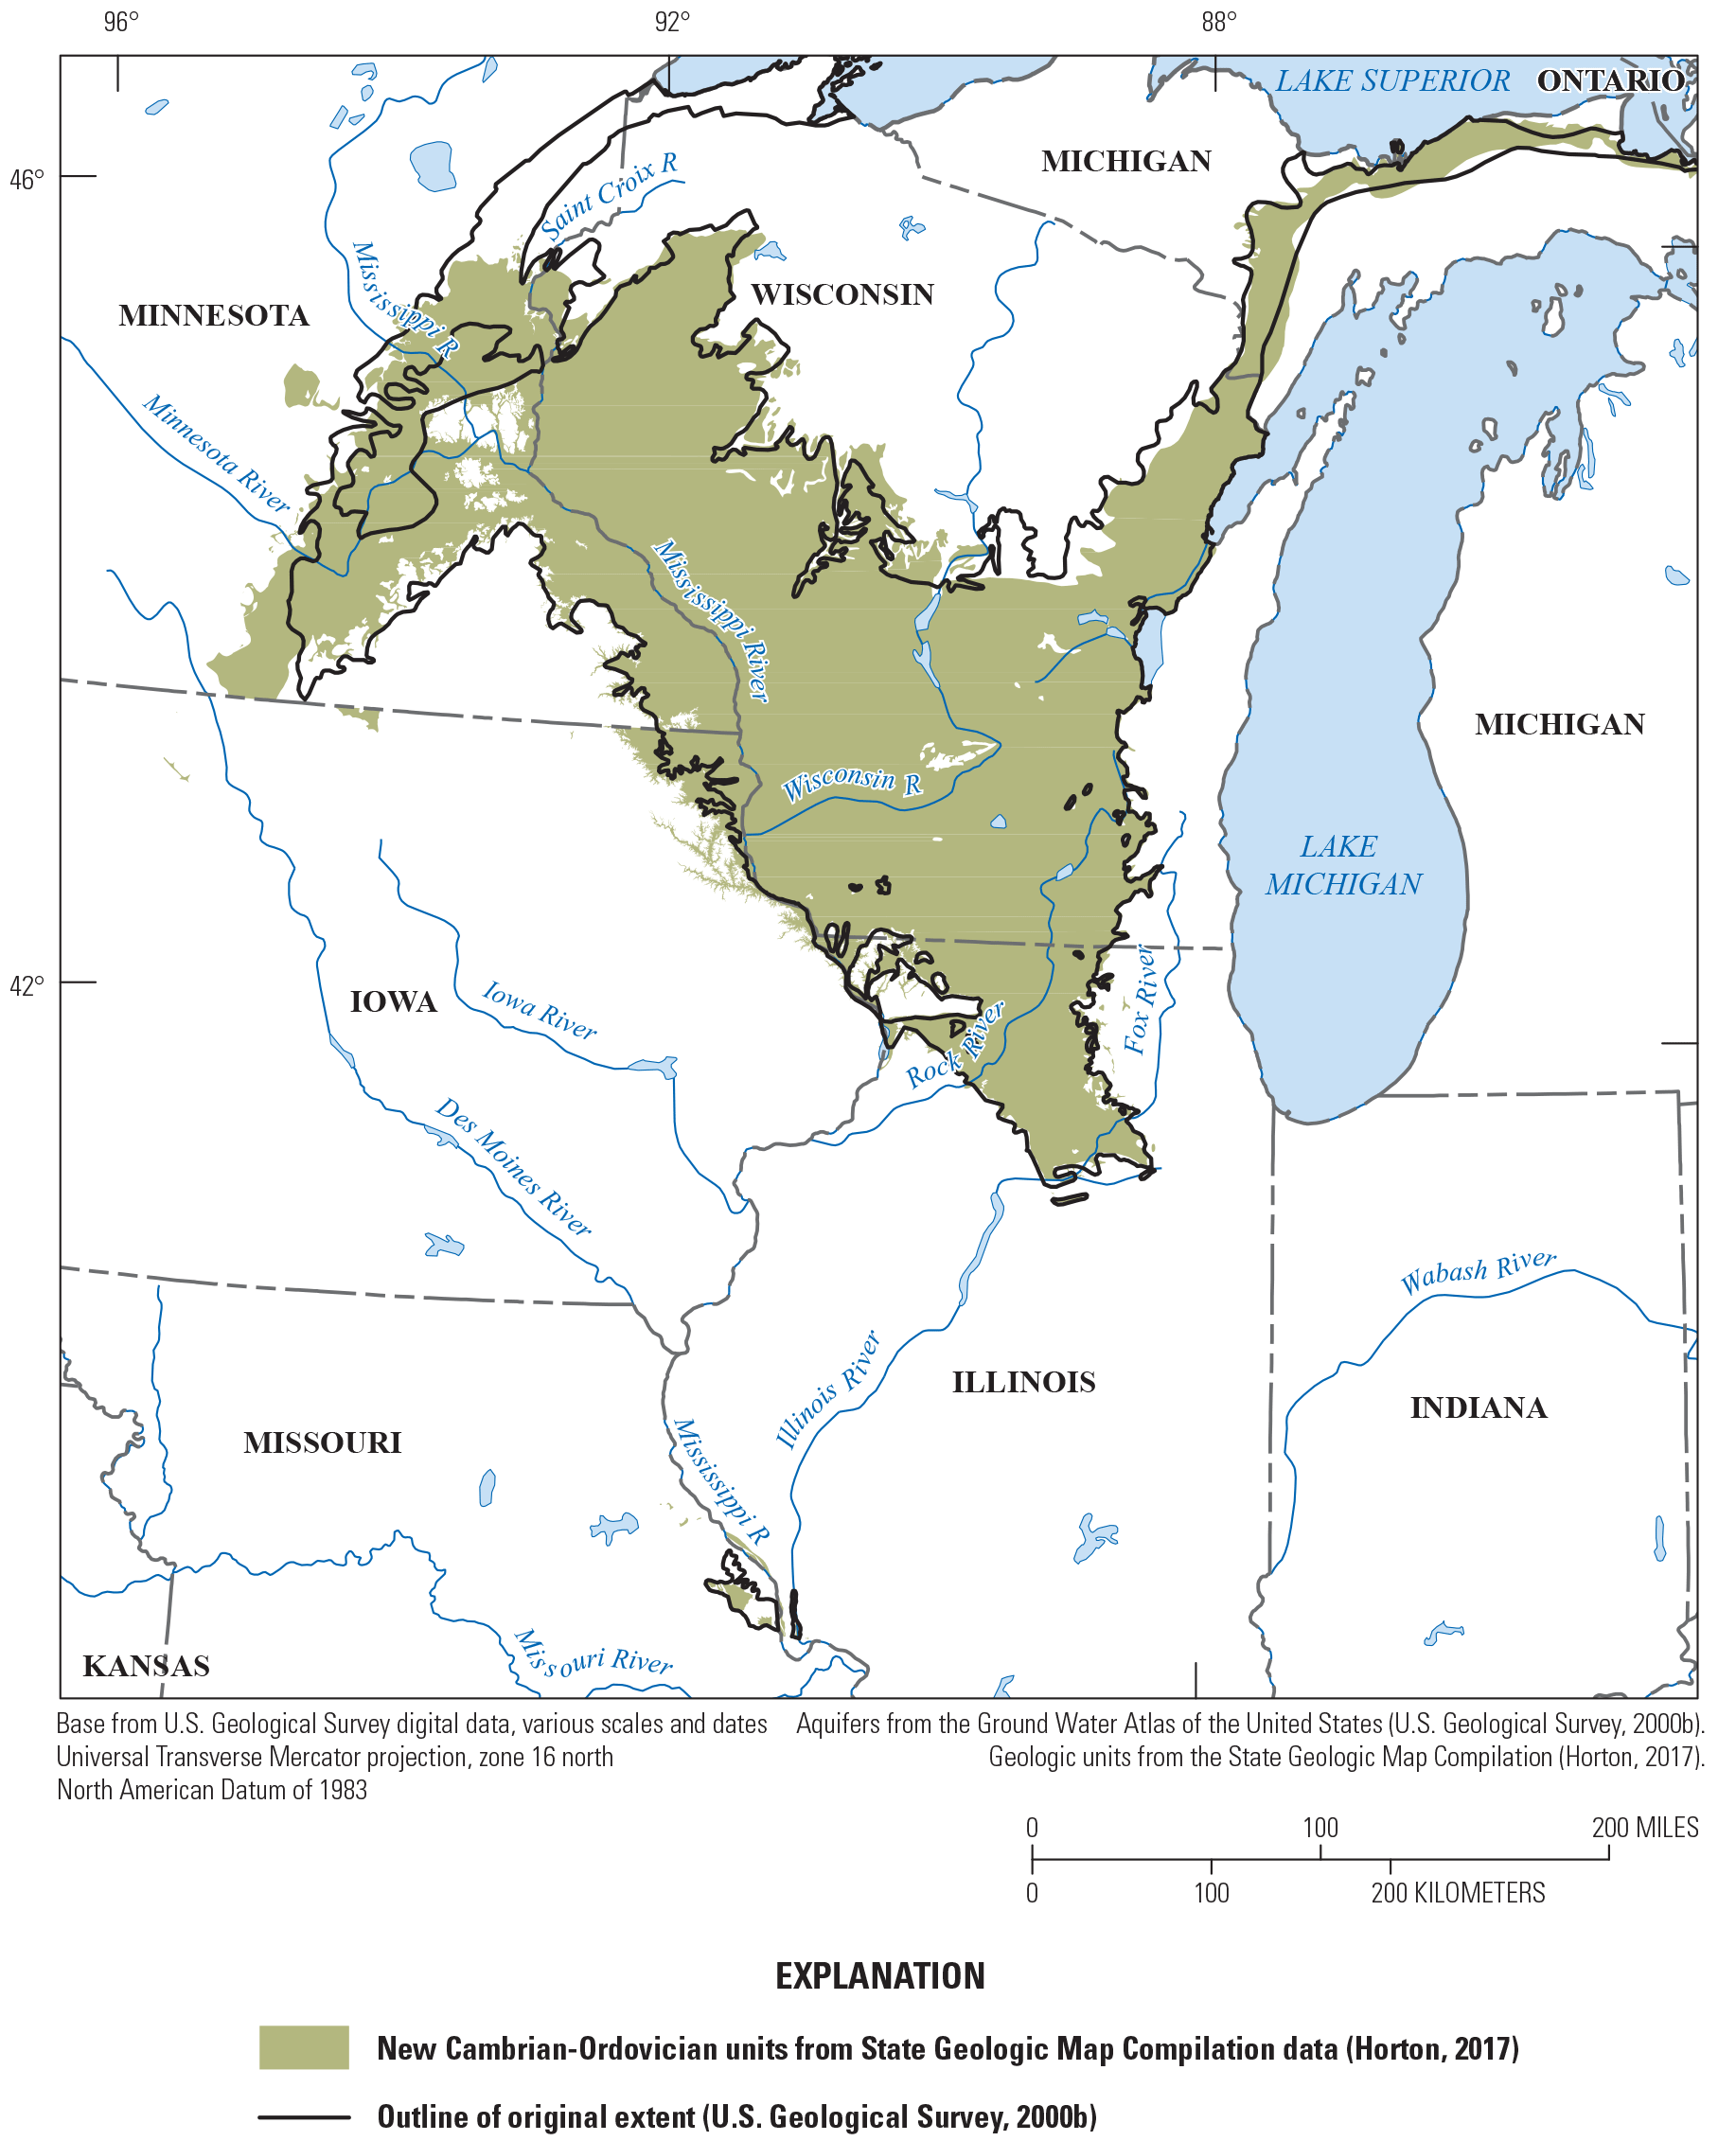 Contrast of the old outline of the Cambrian-Ordovician aquifer system with the revised
                        boundary.